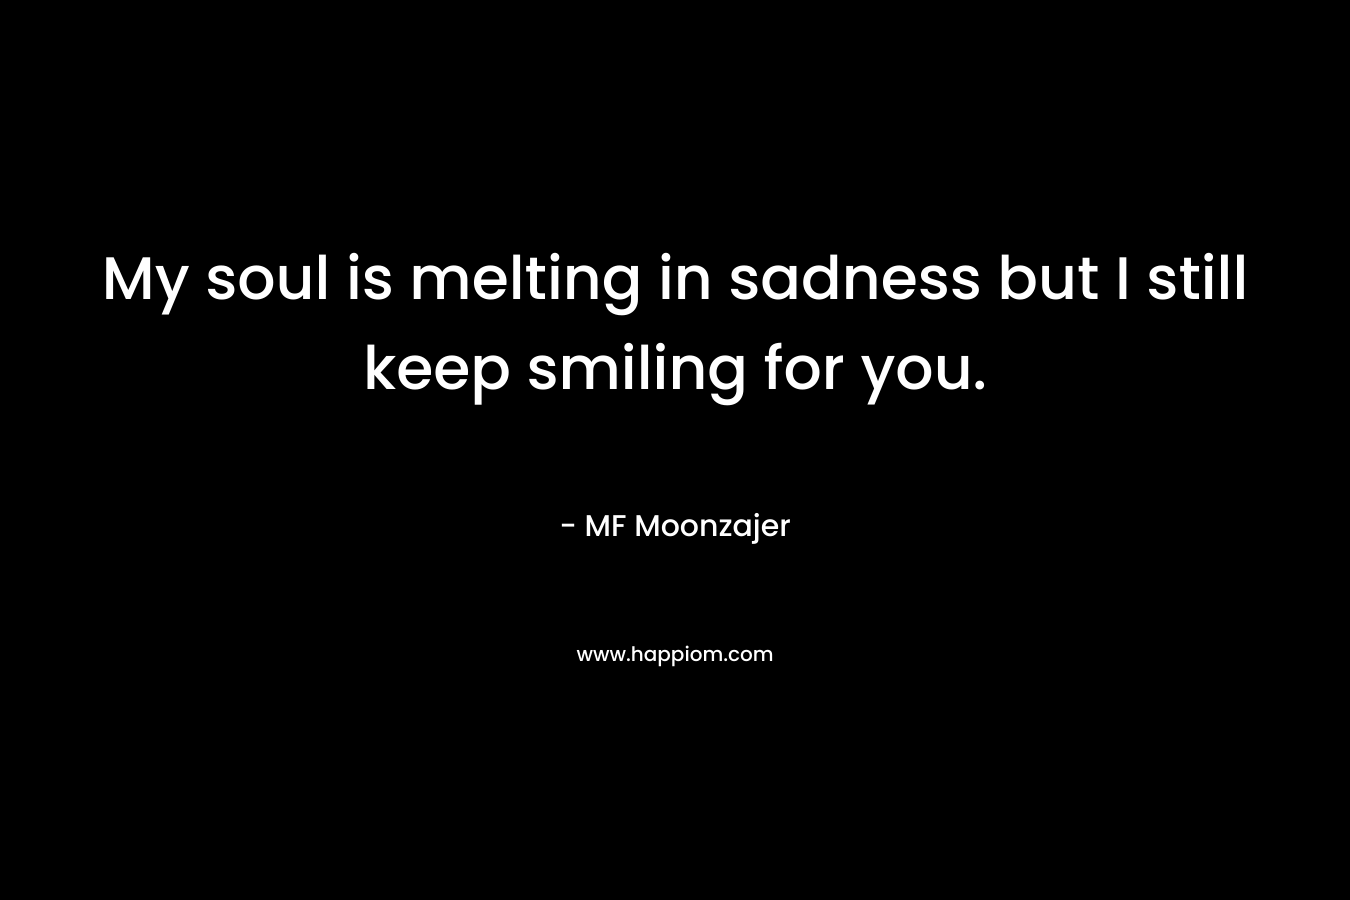 My soul is melting in sadness but I still keep smiling for you. – MF Moonzajer